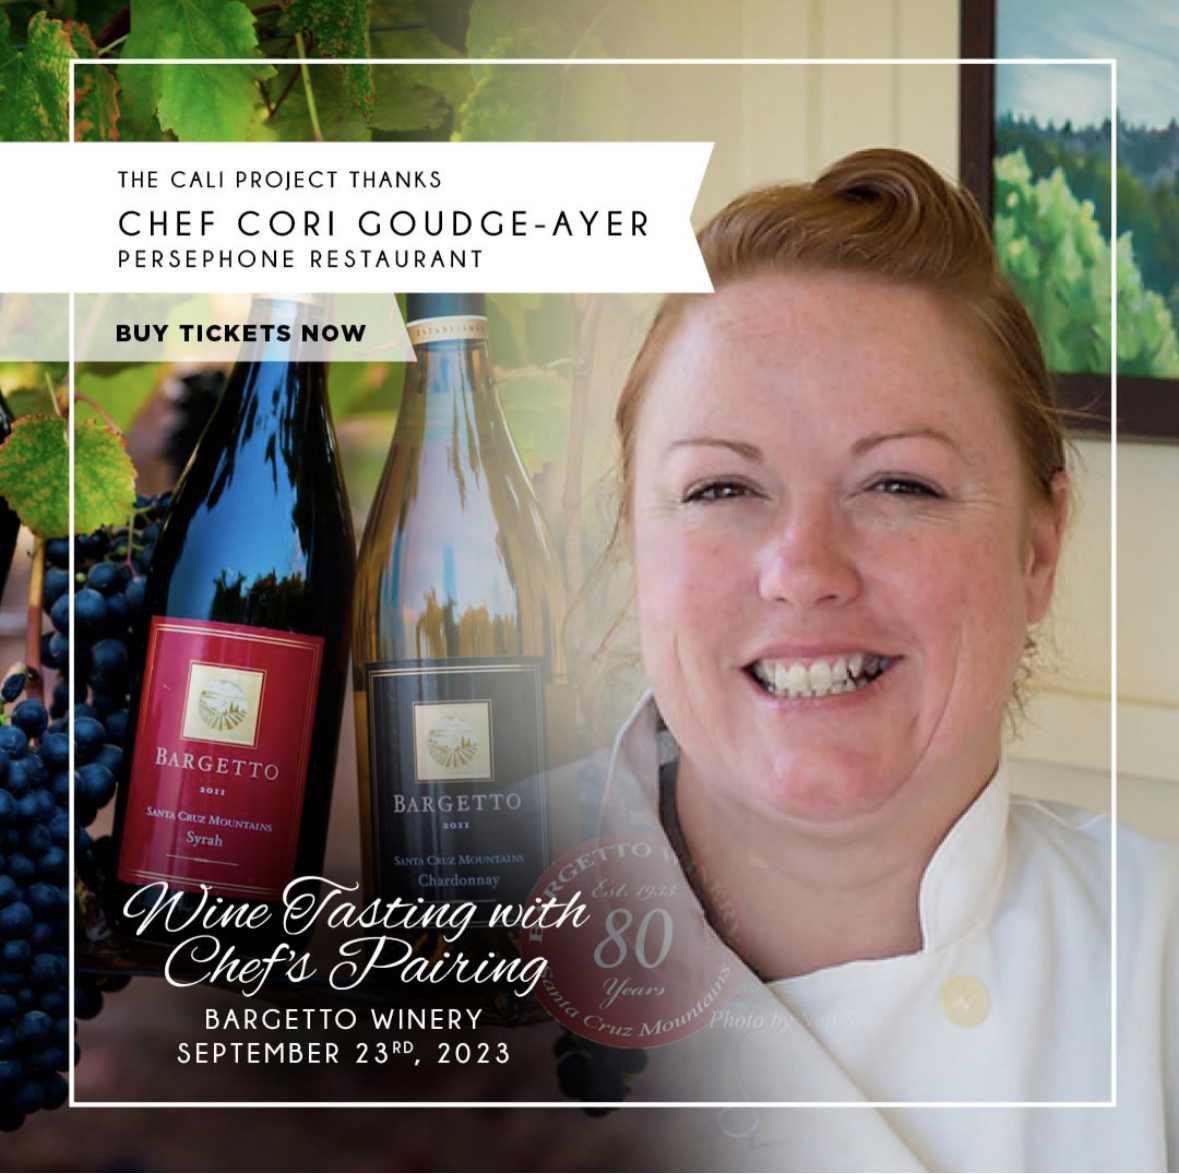 Boots, Bottles & Bow Ties benefit – Live Music, Food & Wine Pairing with Famous Local Chefs!